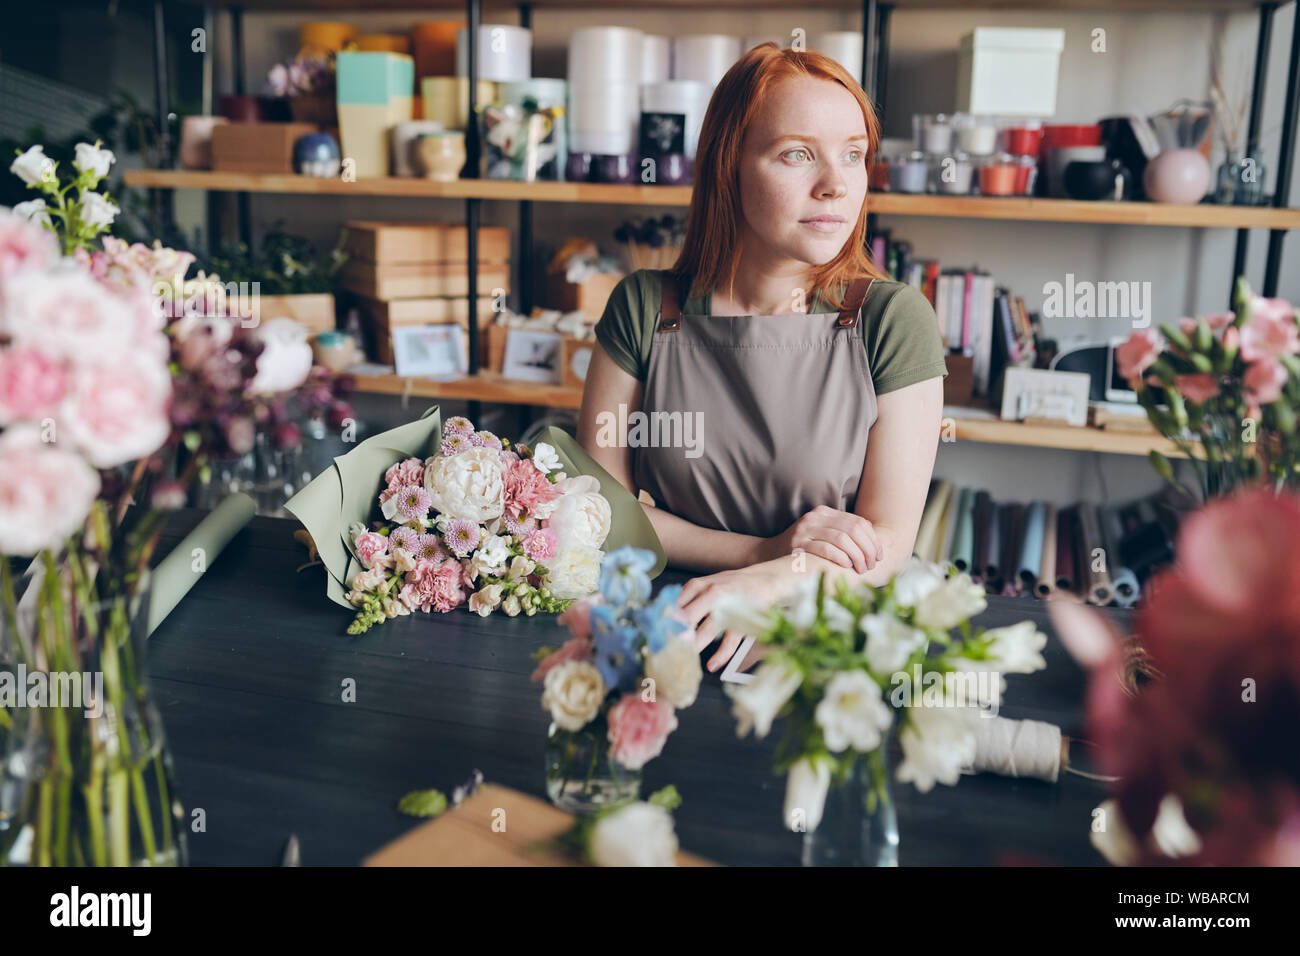 Florist waiting for customer in flower shop Stock Photo